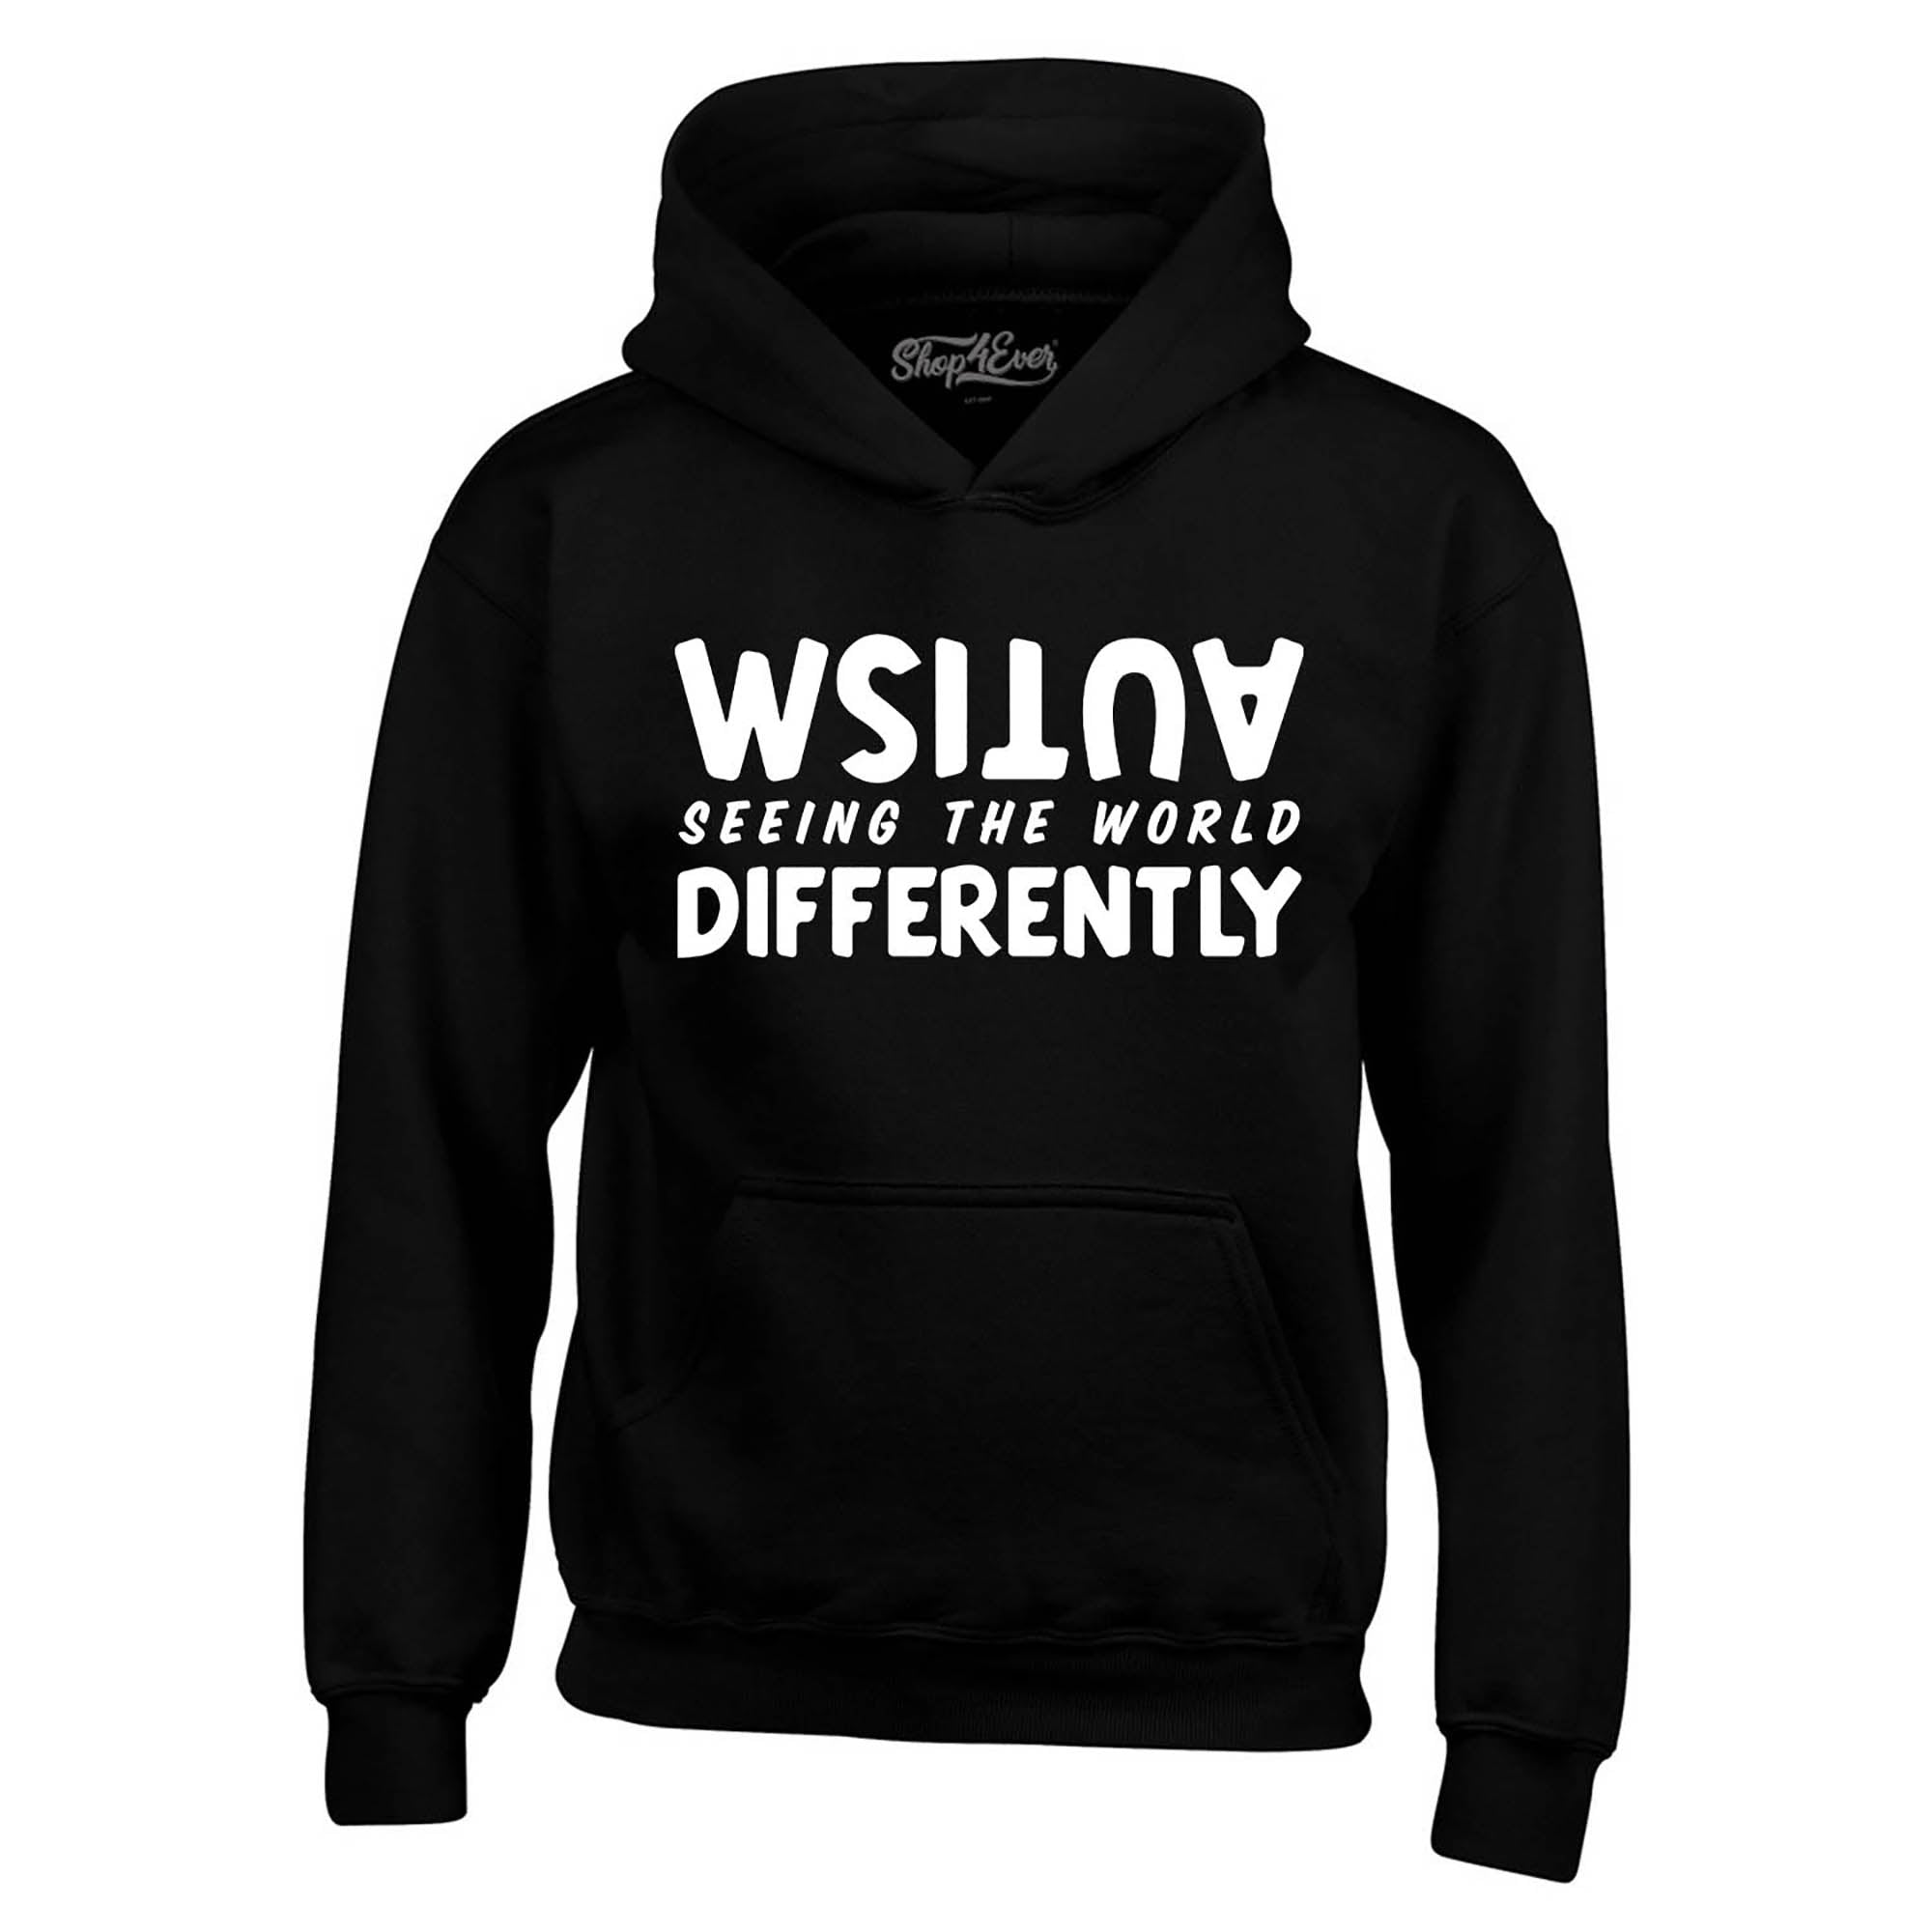 Autism Seeing the World Differently Hoodie Sweatshirts